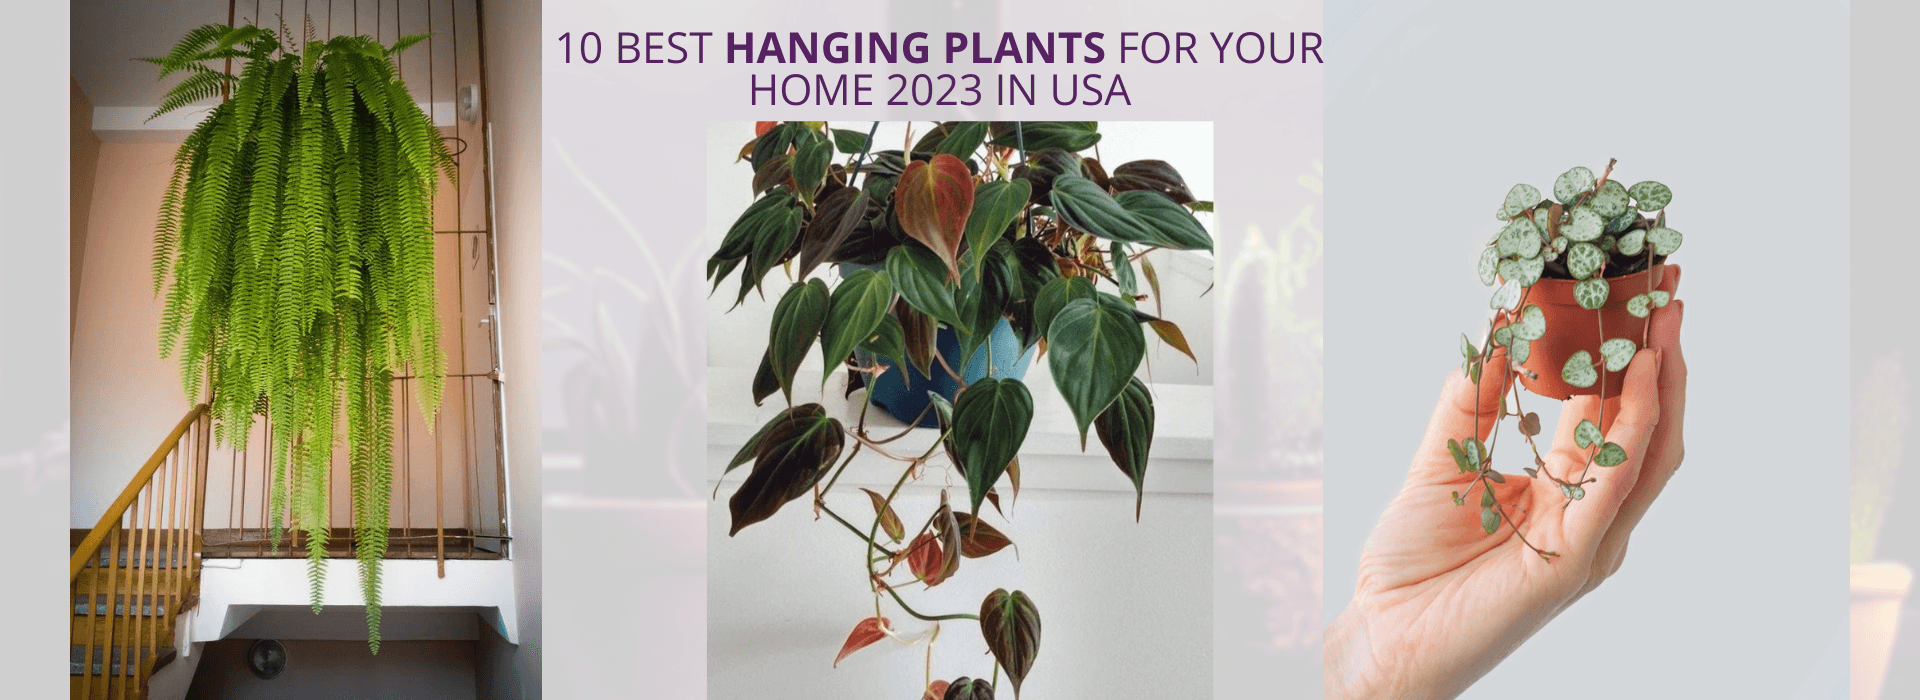 Best Hanging Plants for Your Home 2023 in USA